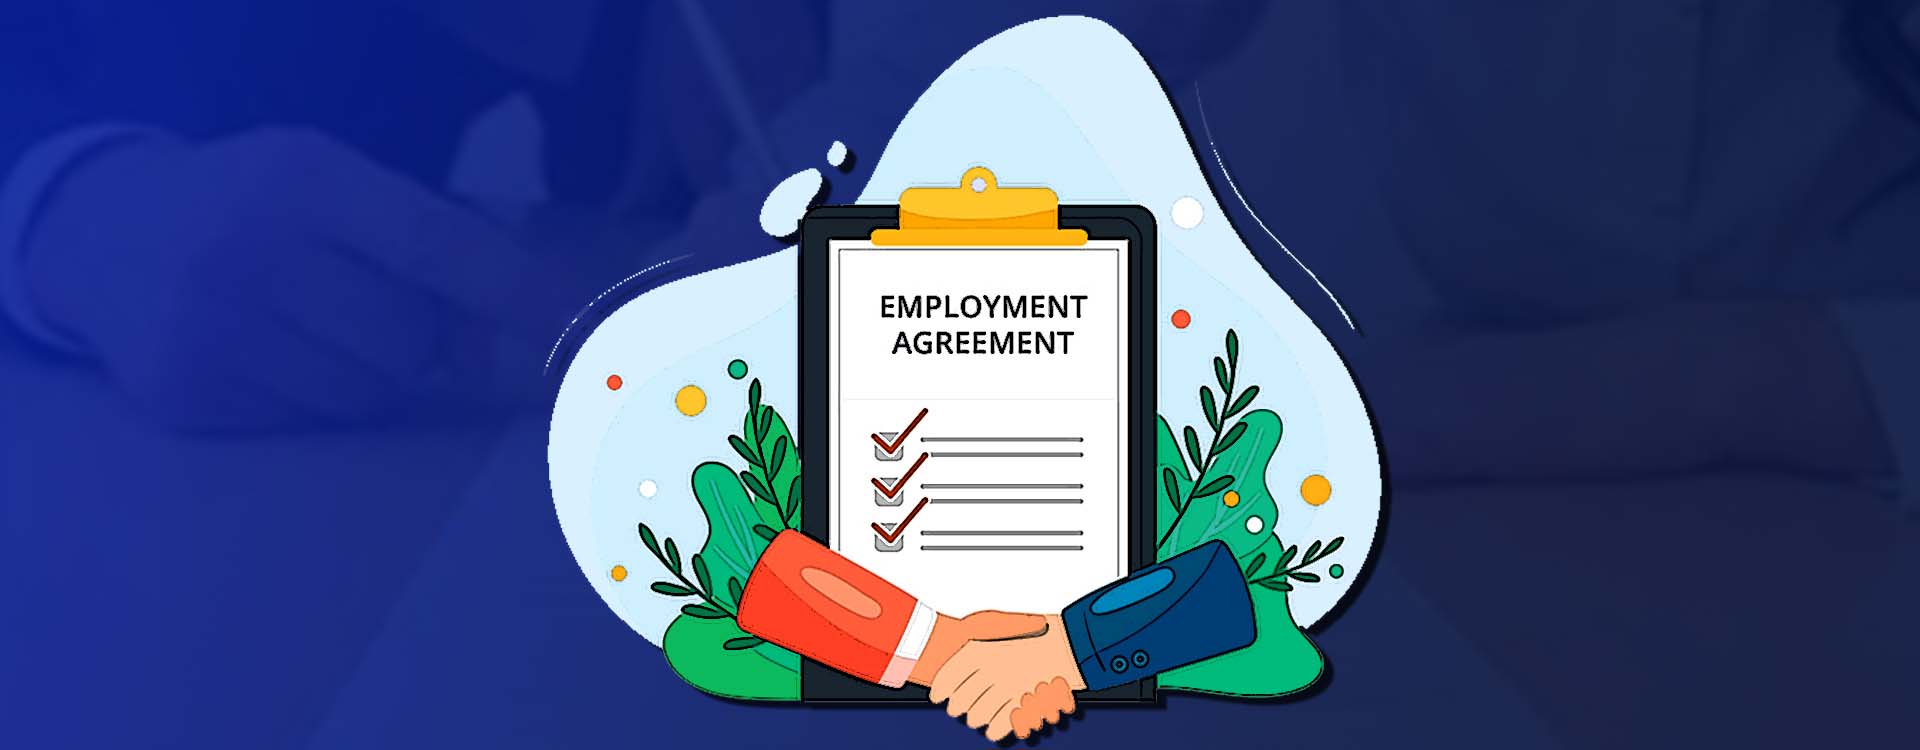 Knowing all about the Employment Agreement before checking in